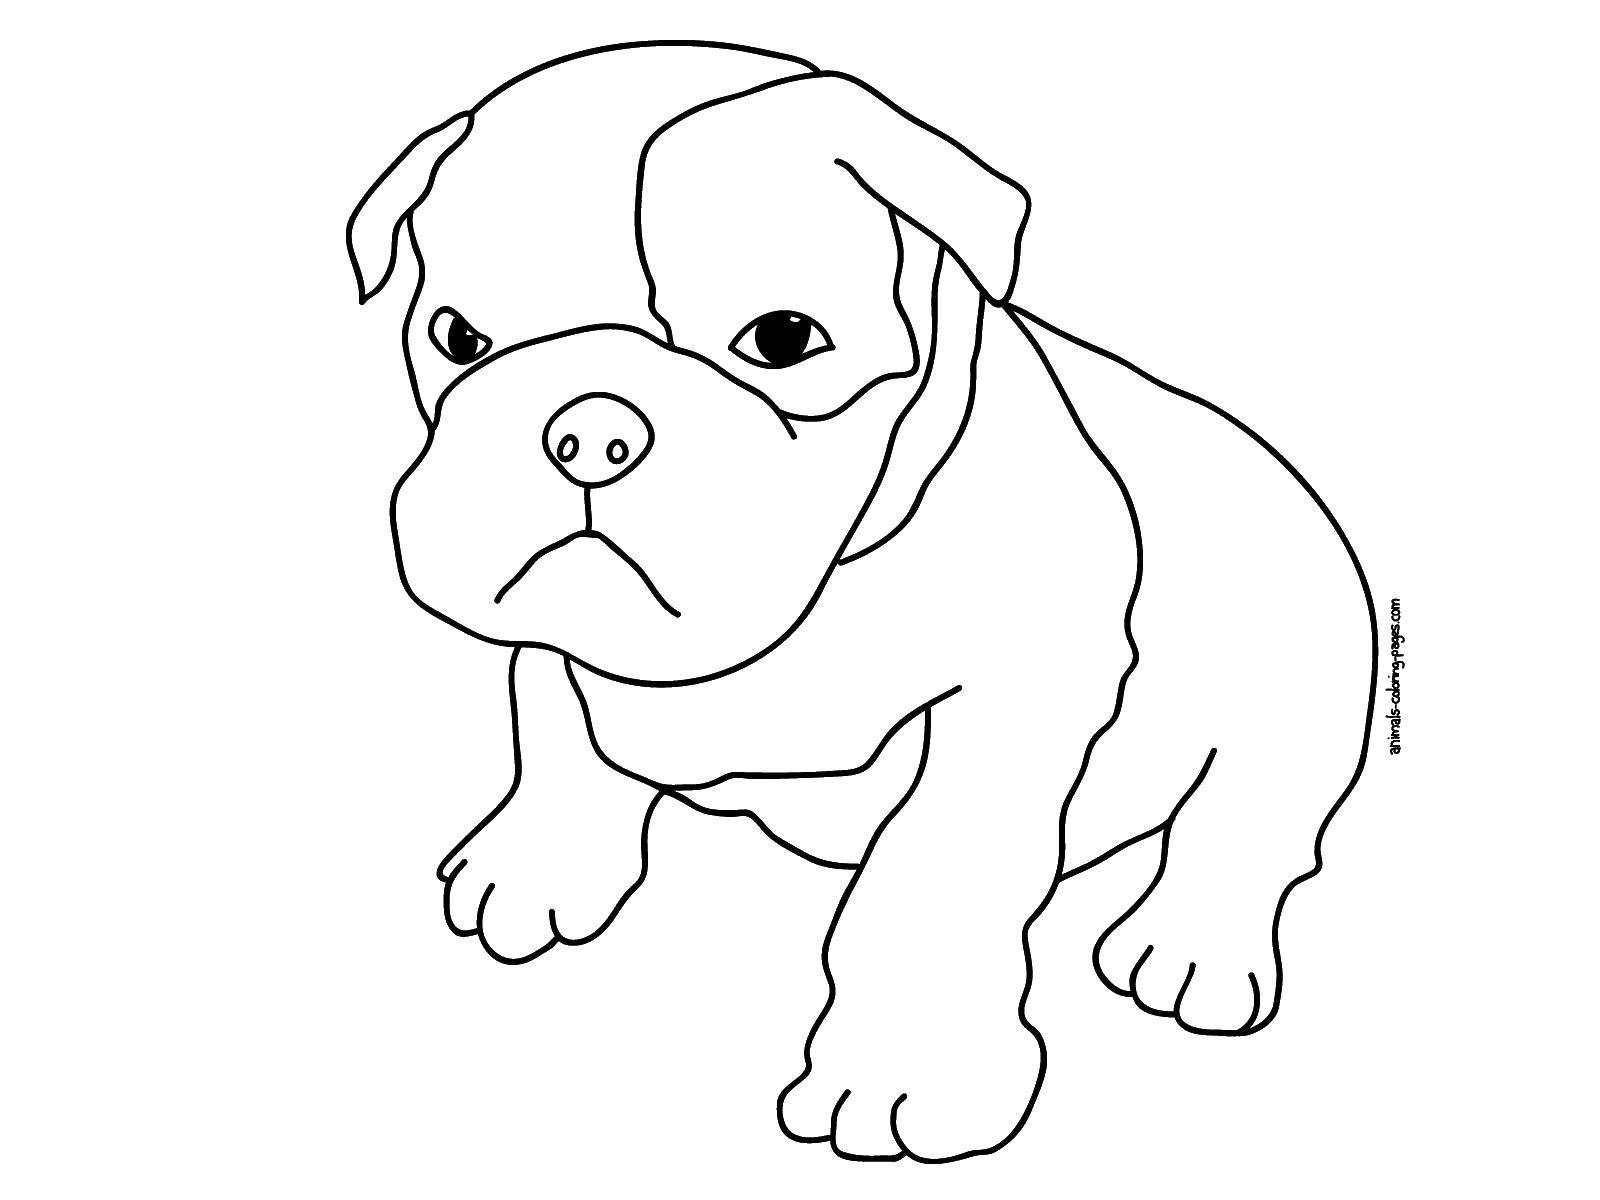 Coloring Angry face. Category Pets allowed. Tags:  Animals, dog.